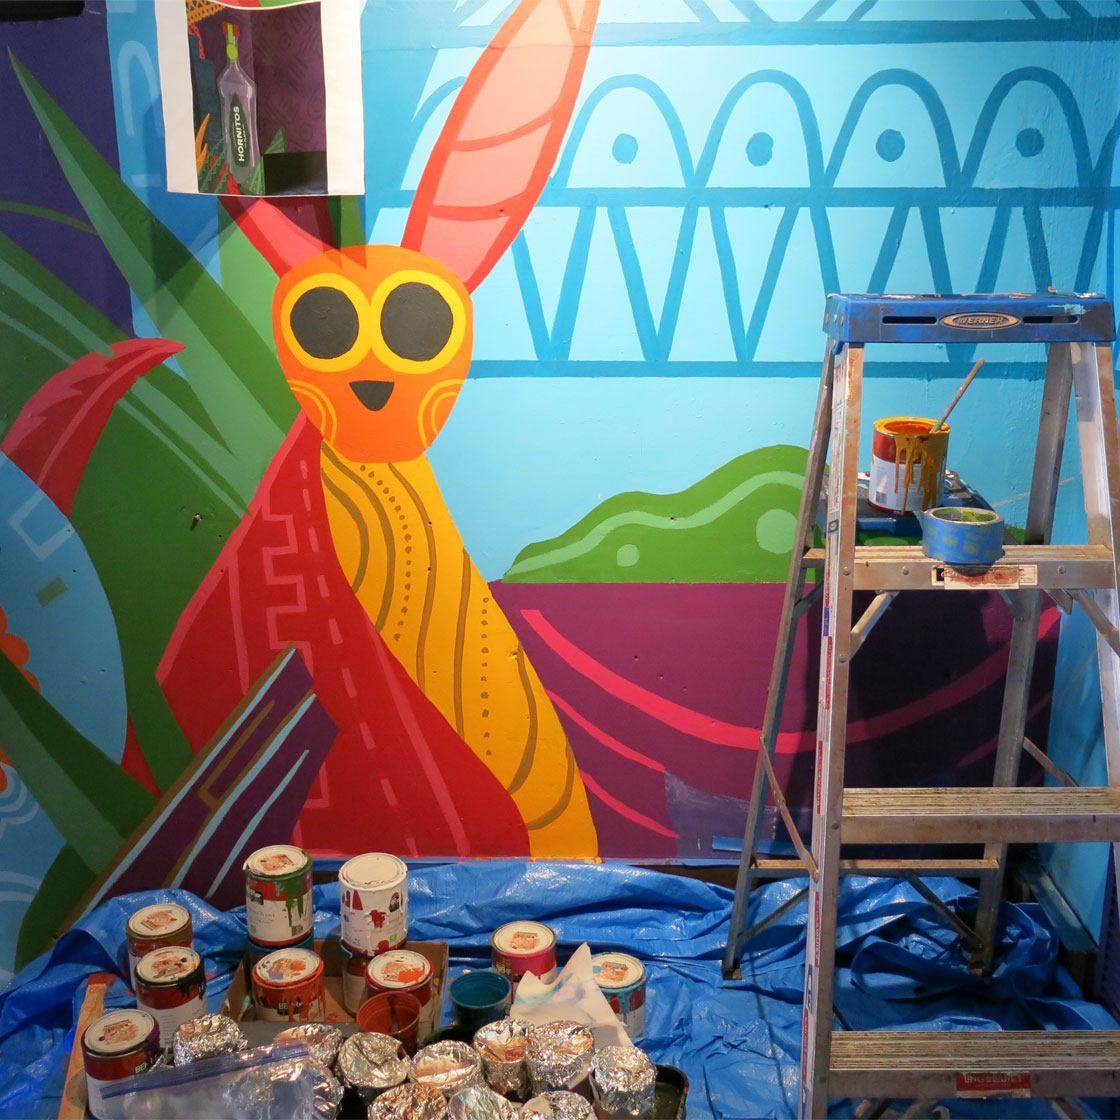 An in progress colorful graphically painted mural inside a restaurant